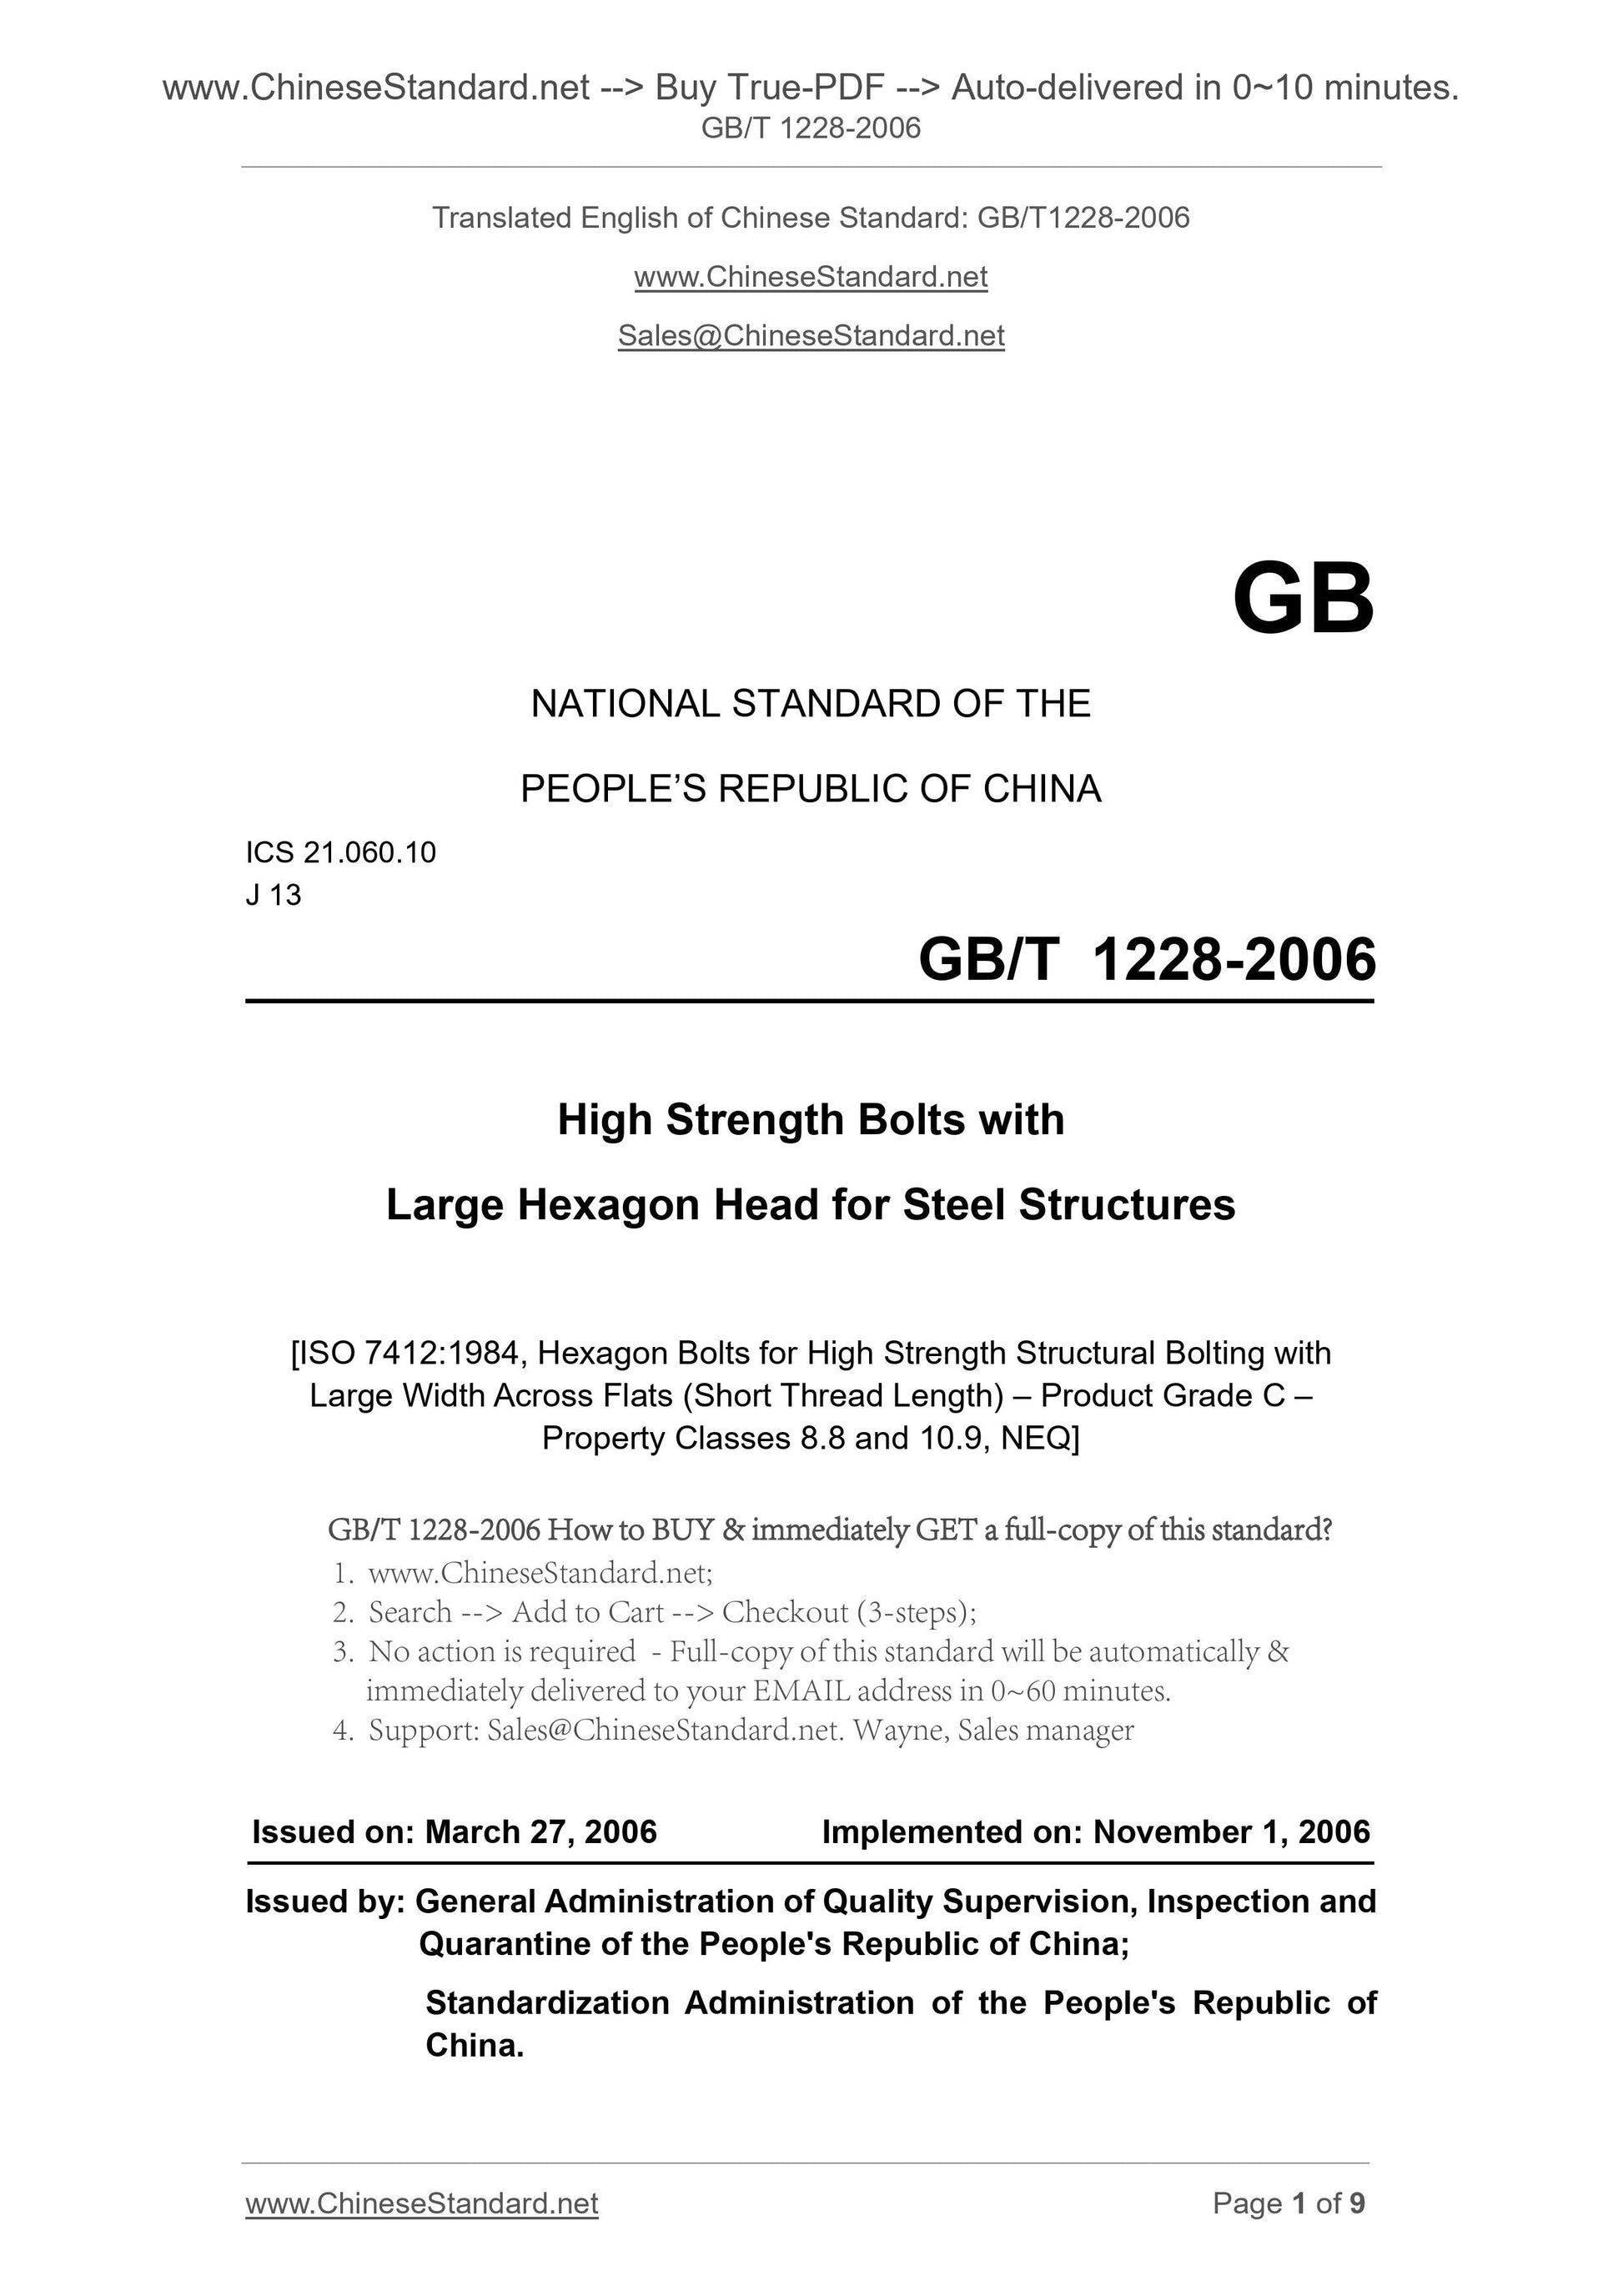 GB/T 1228-2006 Page 1